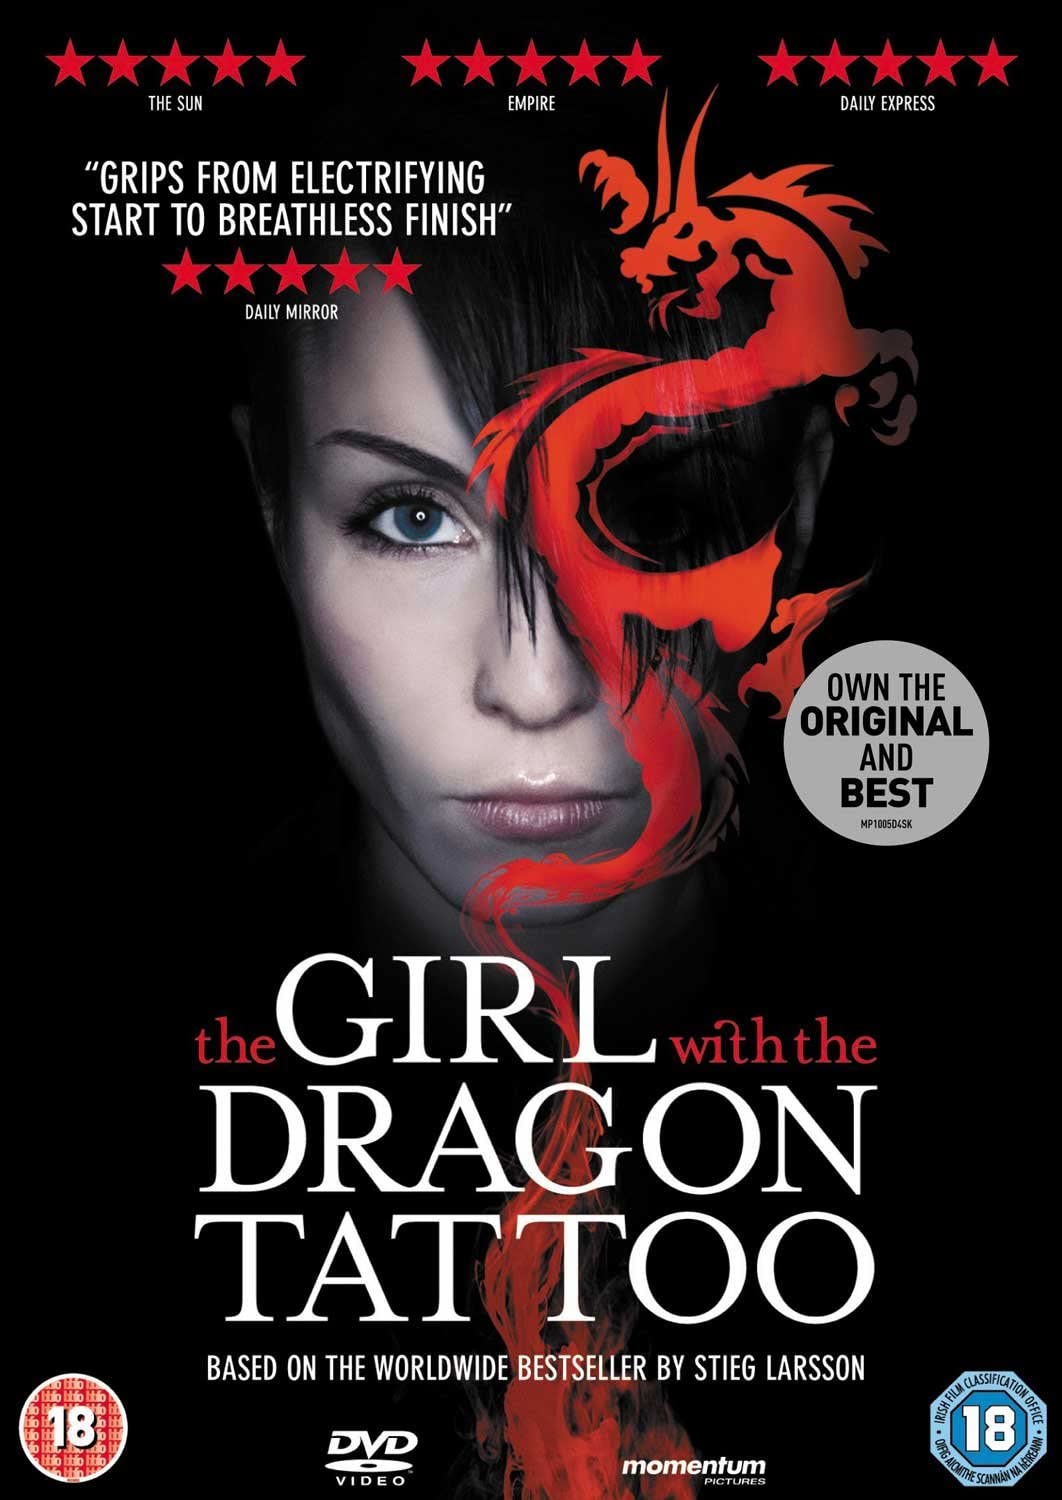 The Girl with the Dragon Tattoo [2010] (DVD)